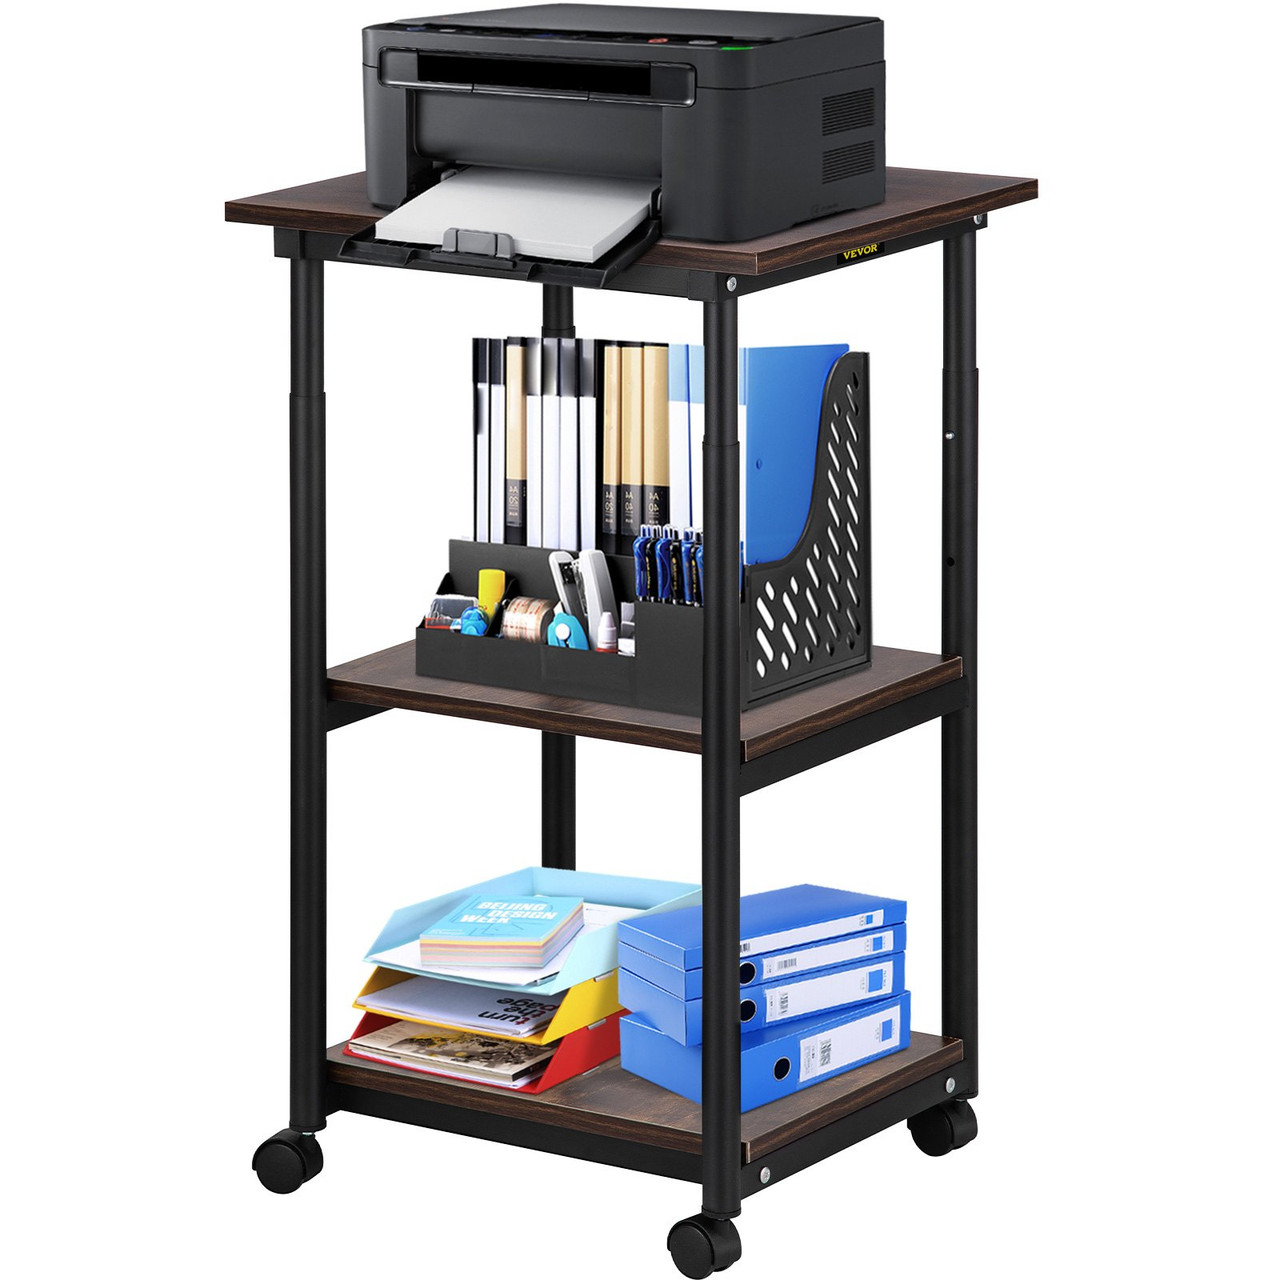 Printer Stand, 3 Tiers, Rolling Machine Cart with Adjustable Shelf & Lockable Wheels, Mobile Printer Table for Fax Scanner File Book in Home Office, Black & Brown